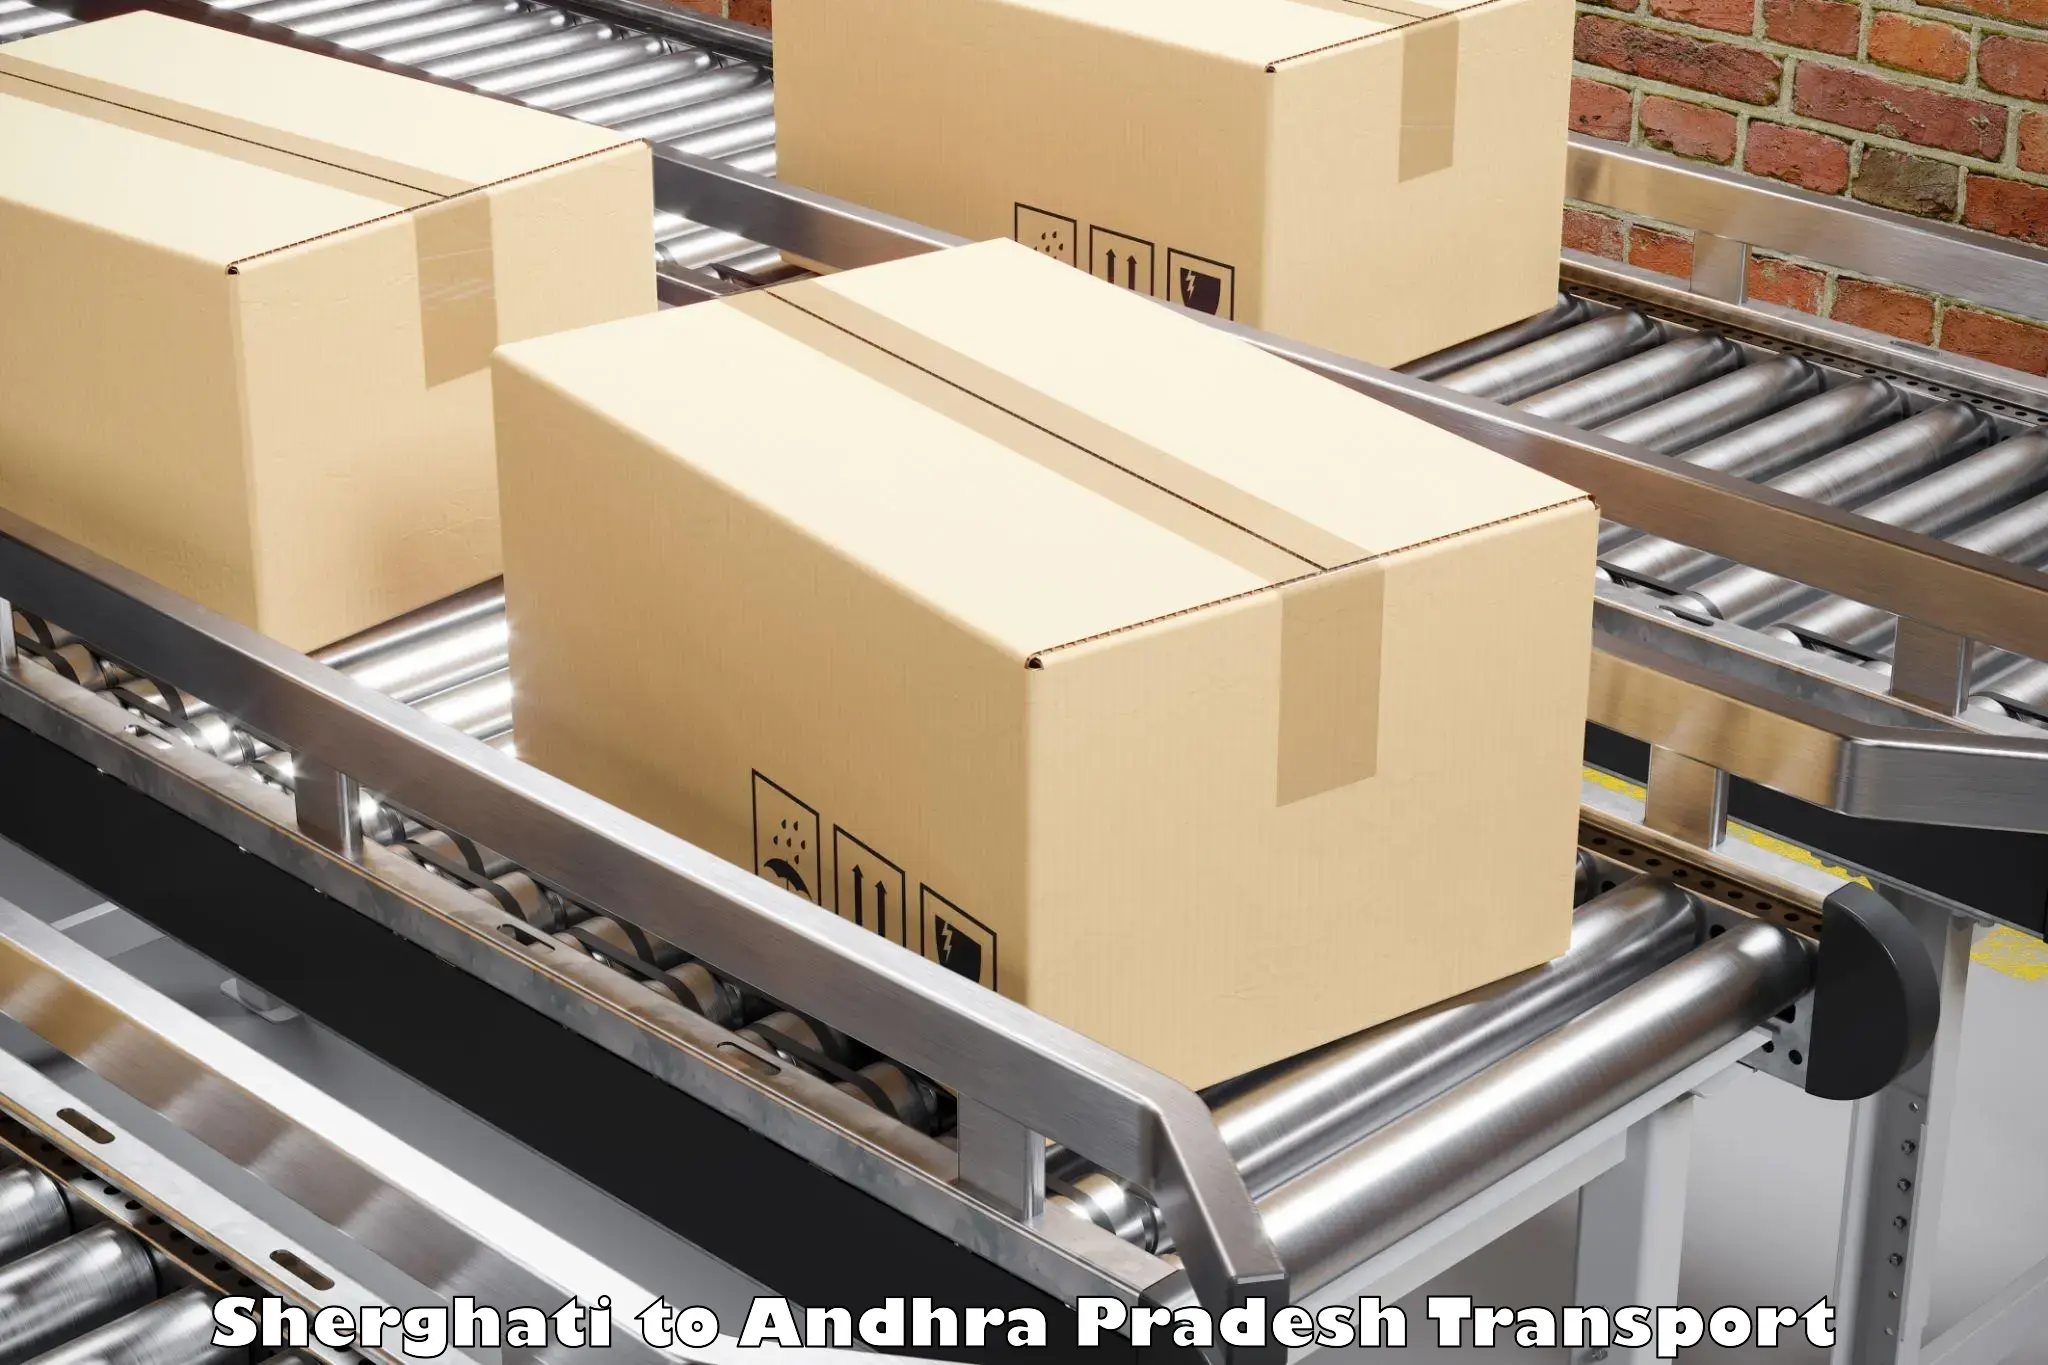 Air freight transport services in Sherghati to Chirala